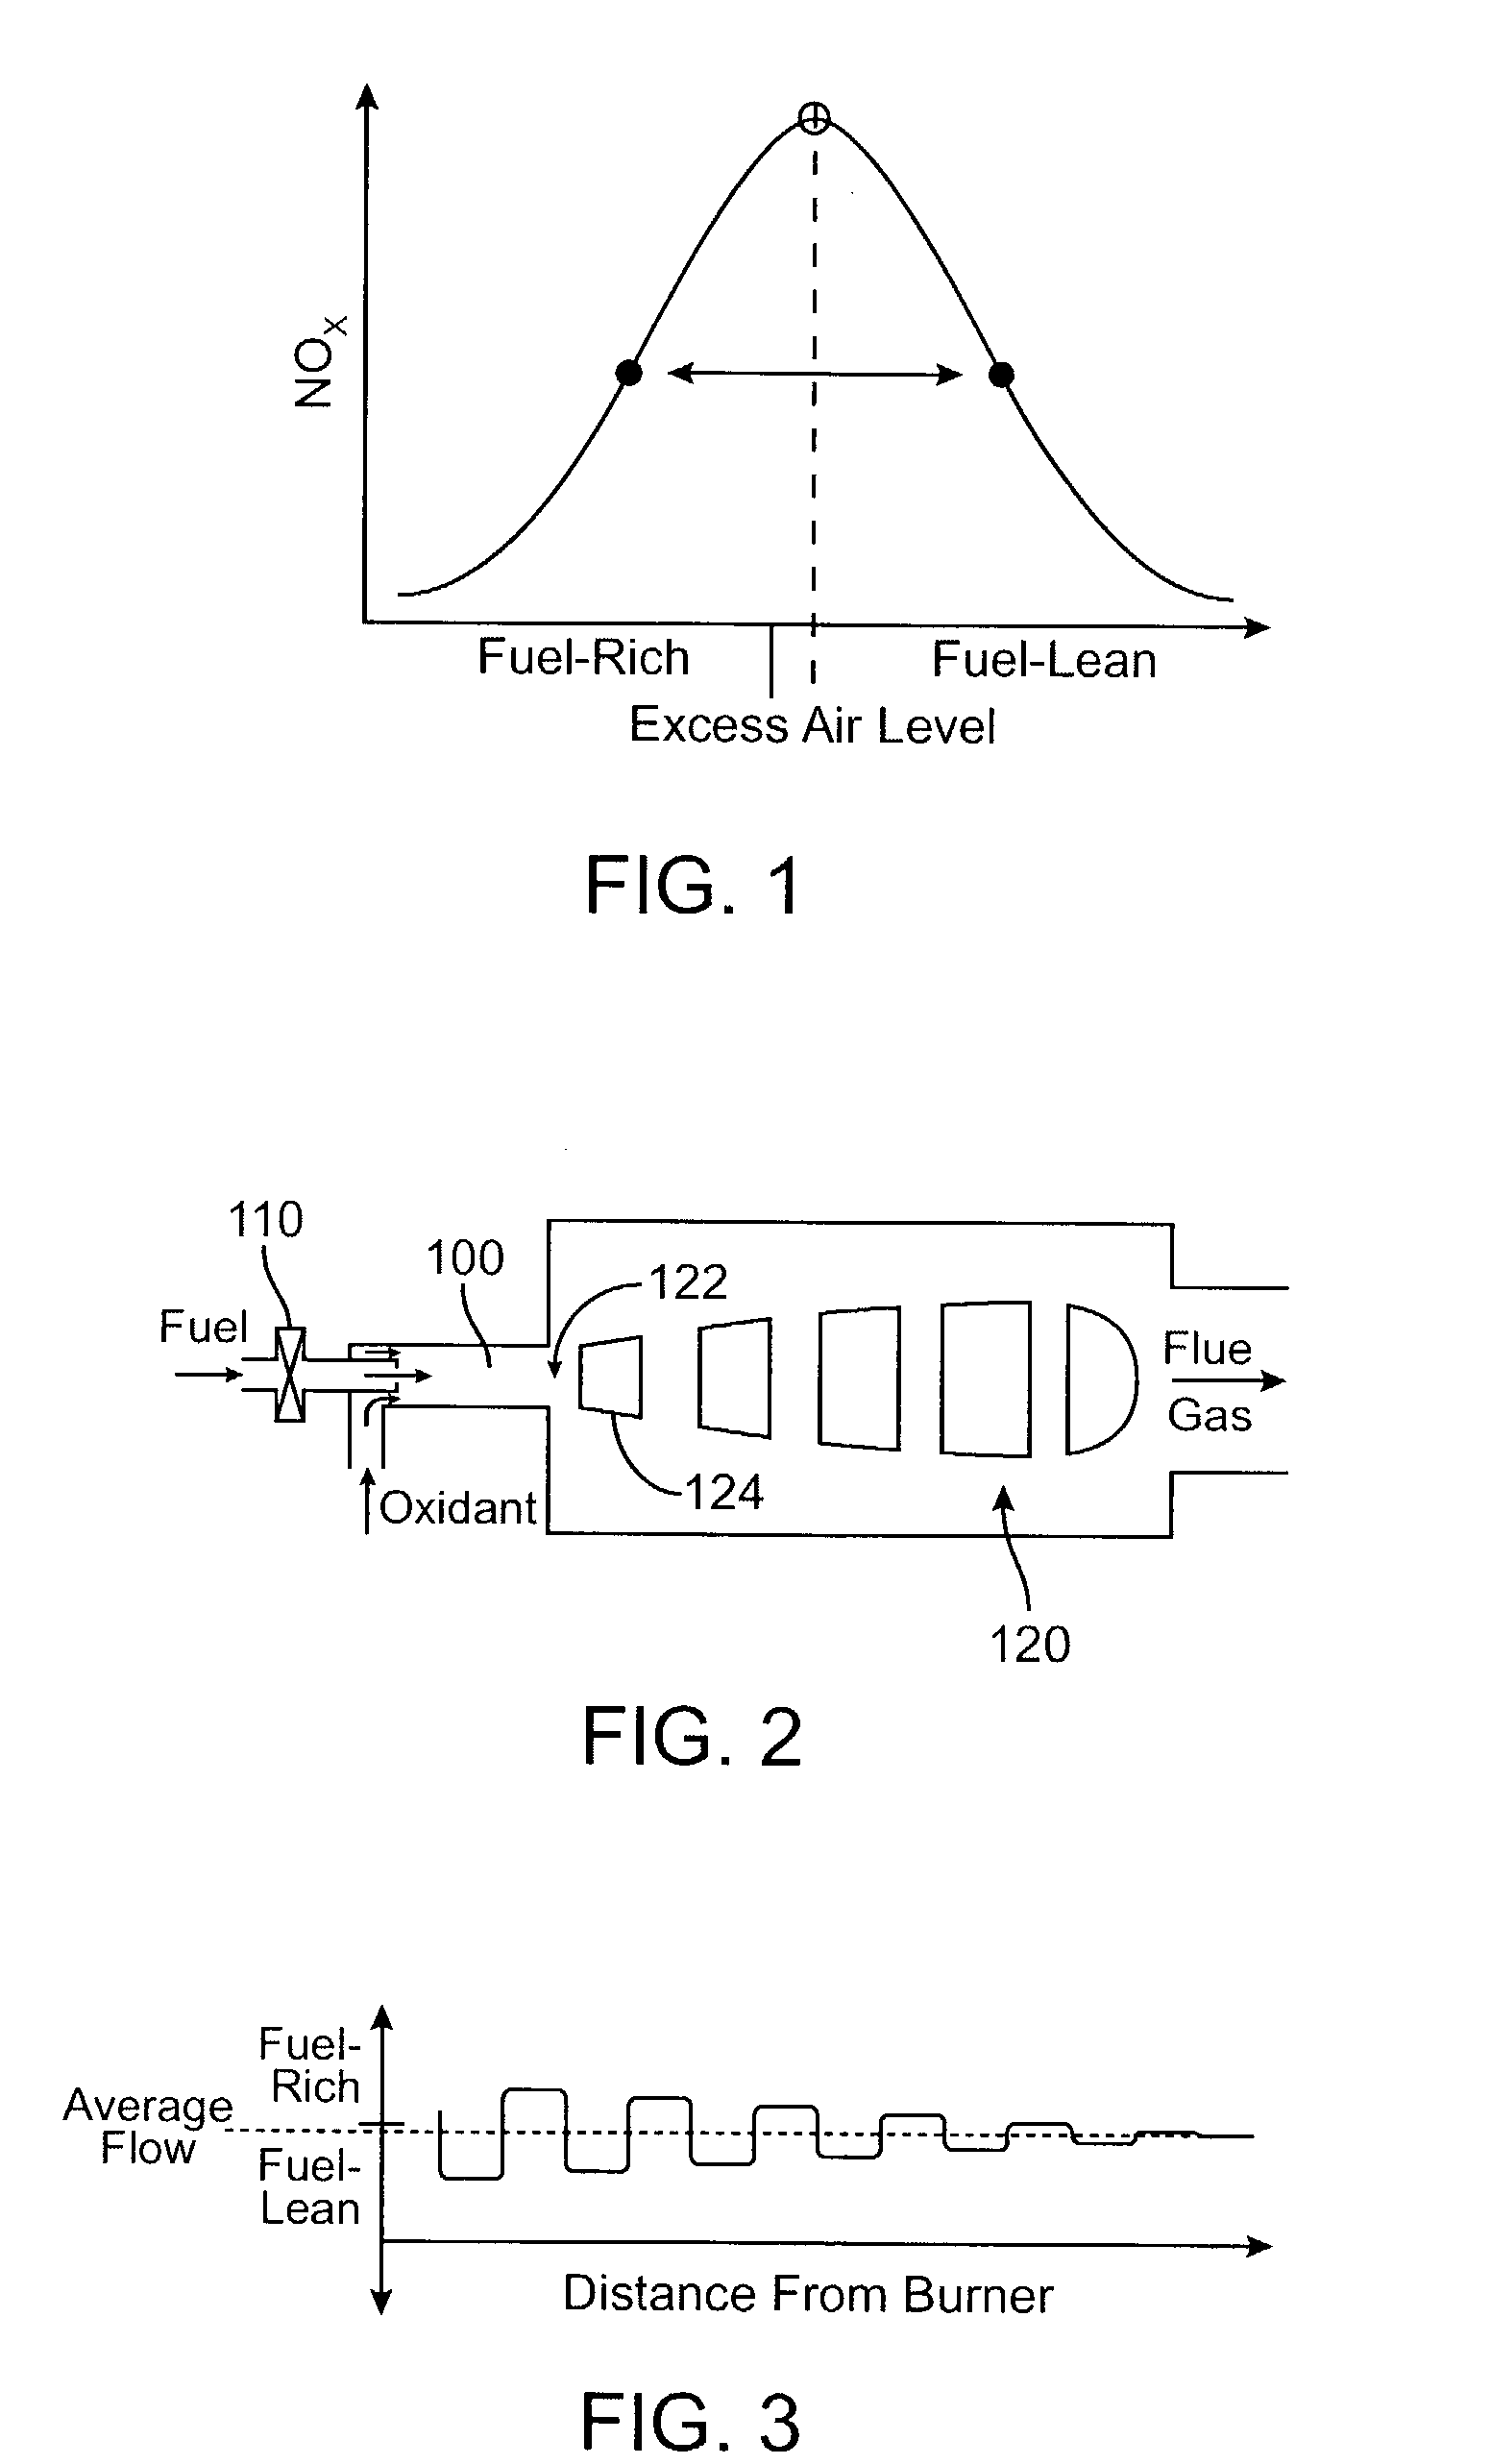 Process and apparatus of combustion for reduction of nitrogen oxide emissions